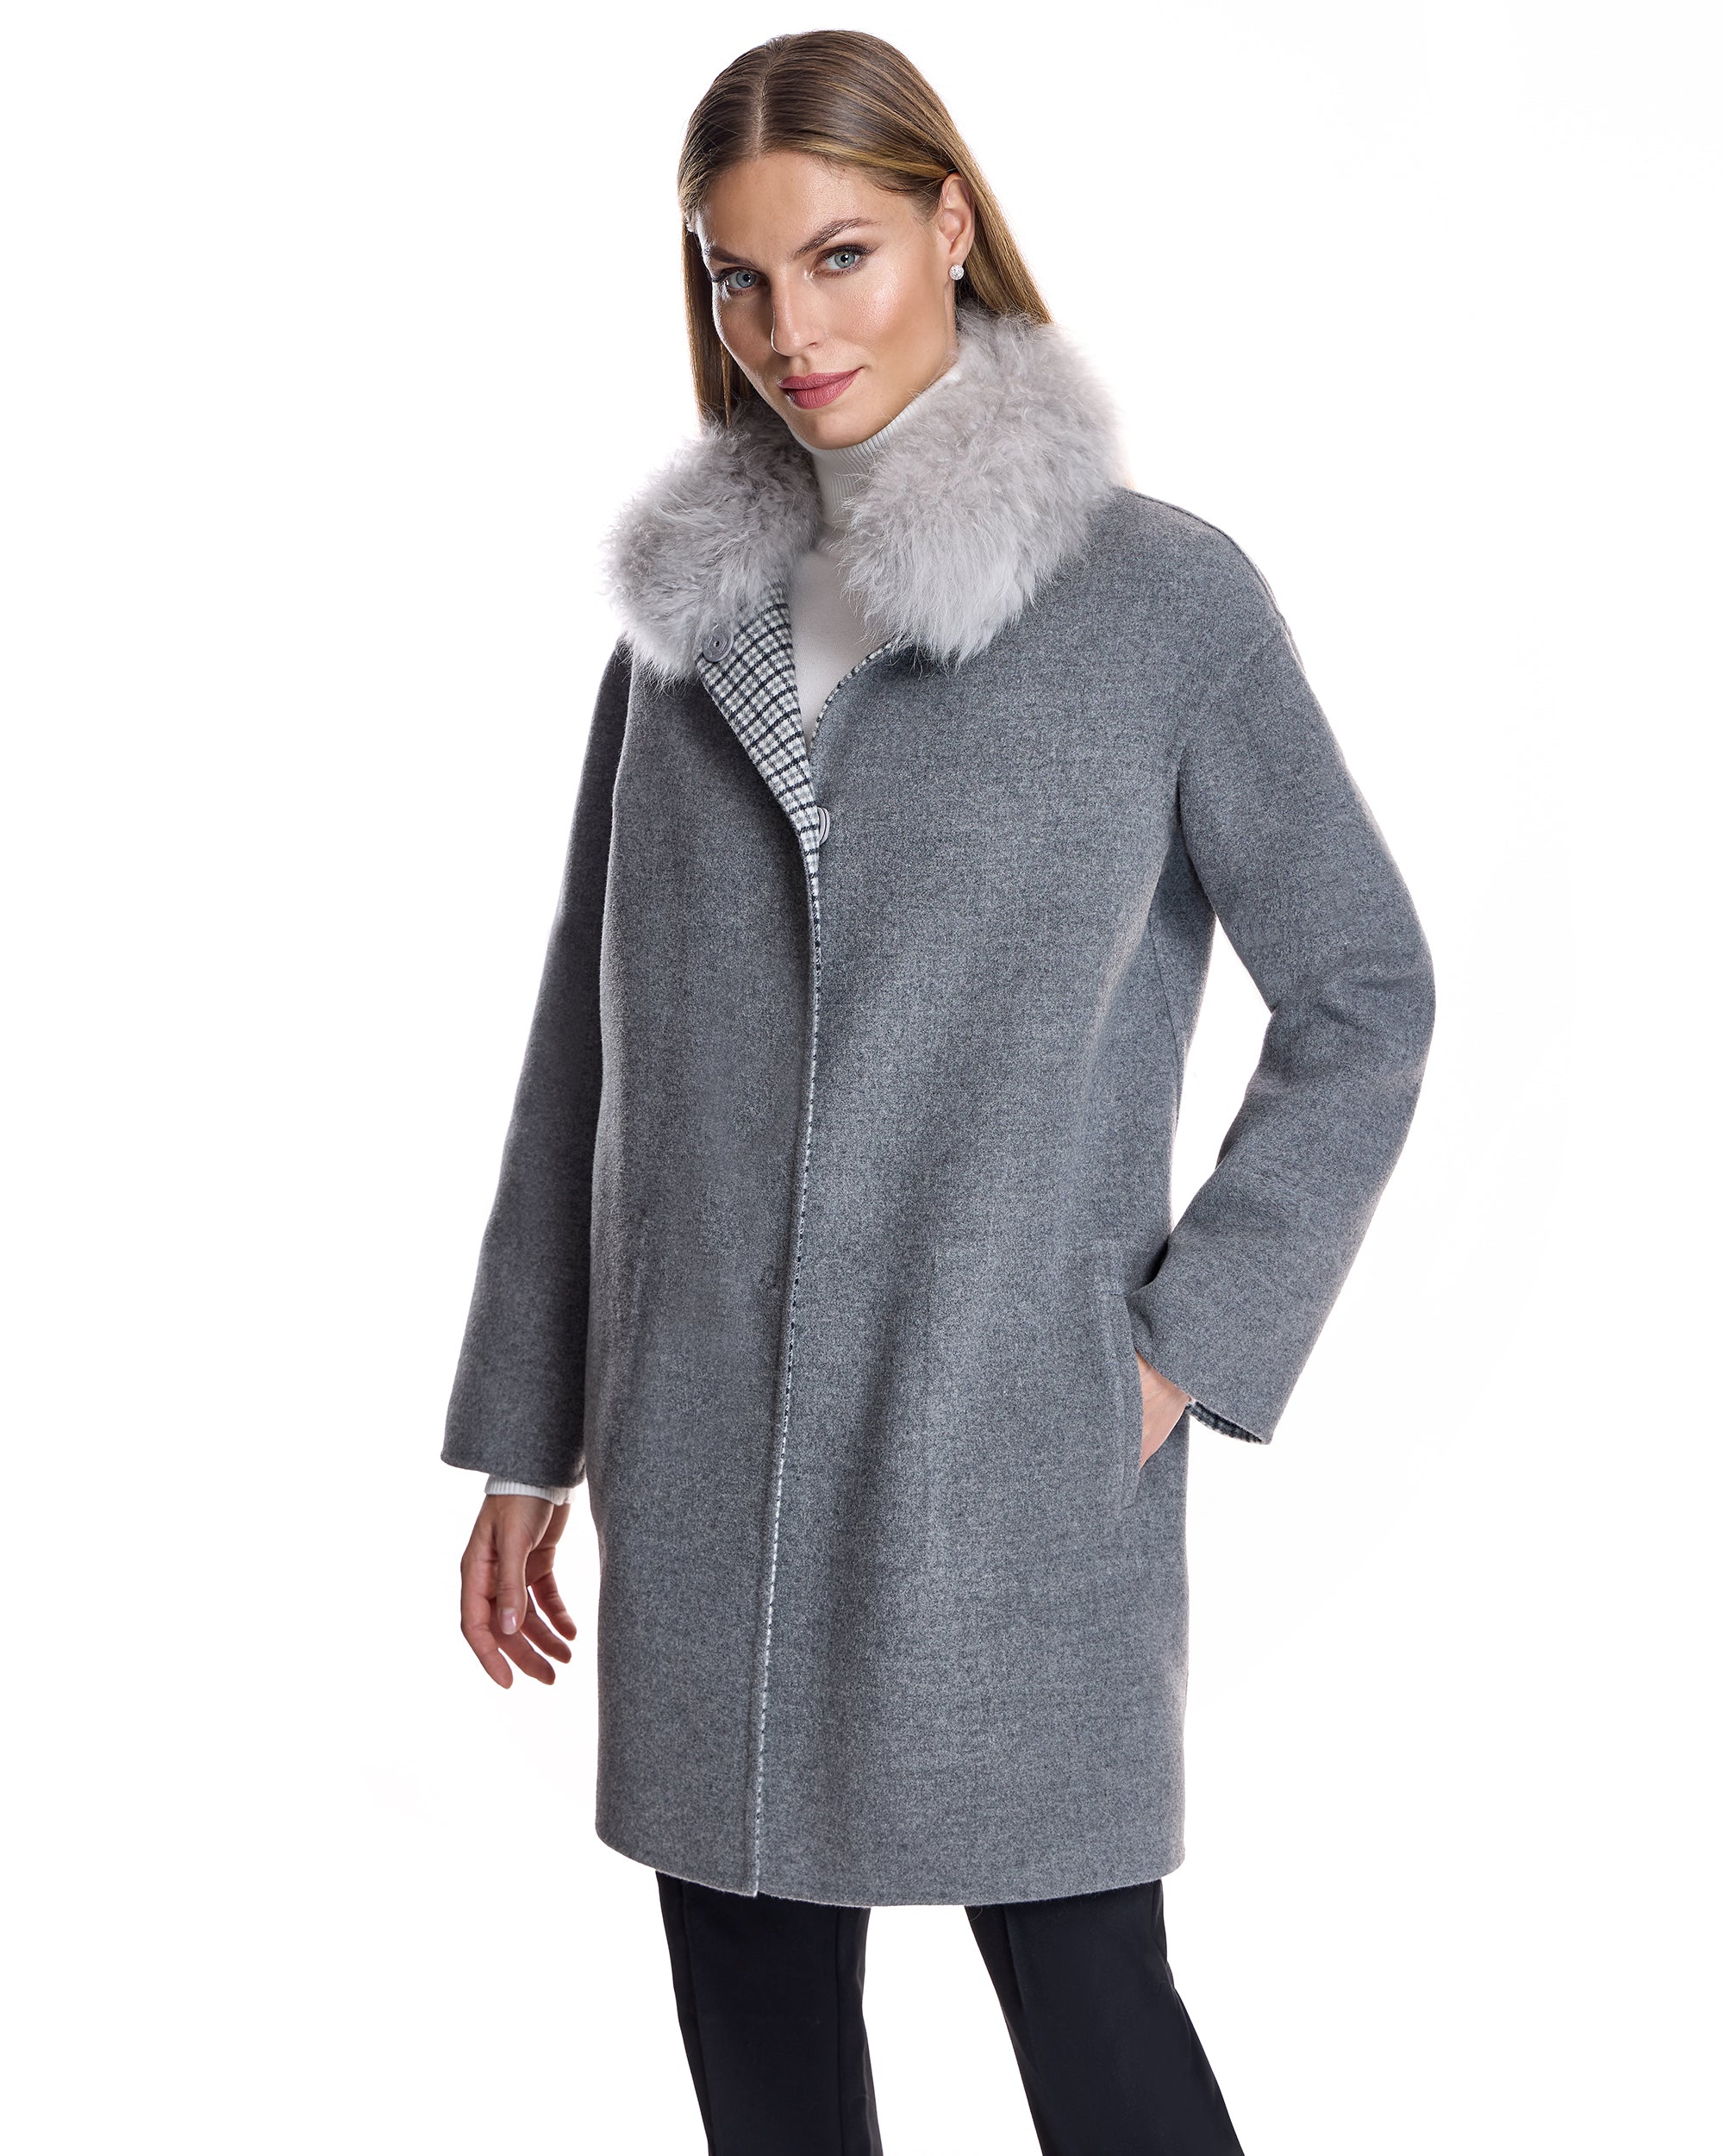 Woolblend Coat with Cashmere lamb Collar